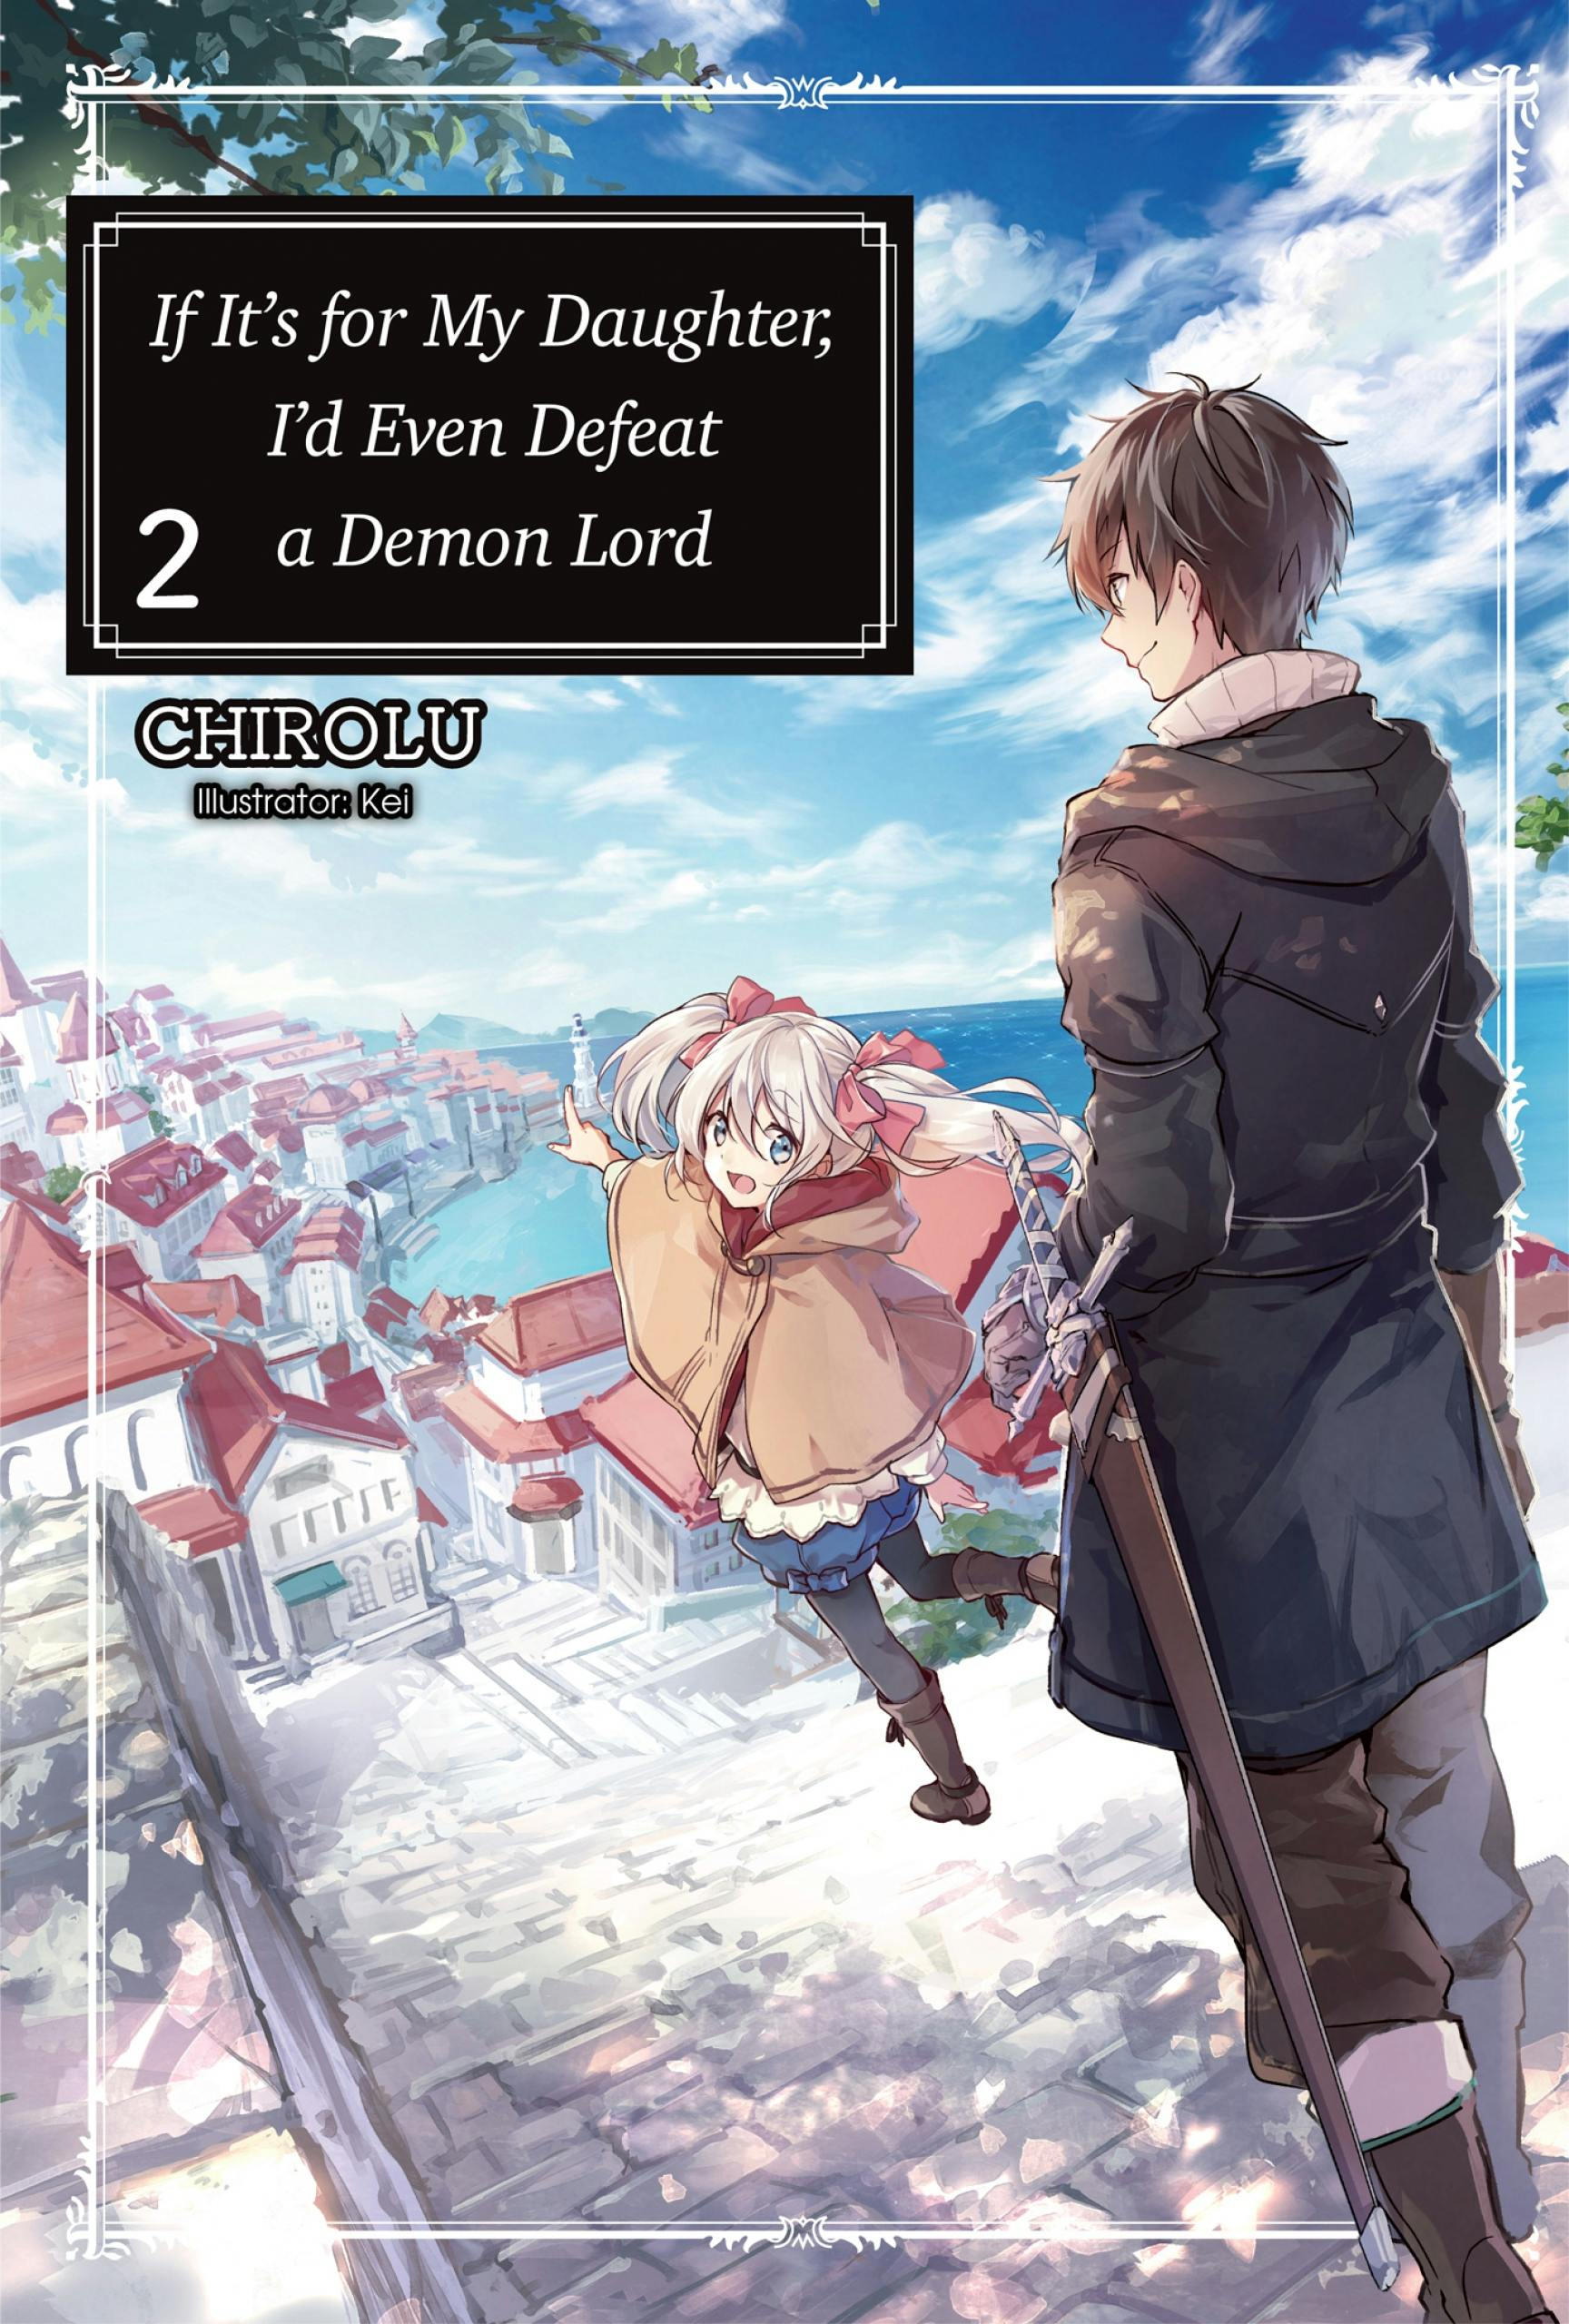 If It’s for My Daughter, I’d Even Defeat a Demon Lord: Volume 2 - CHIROLU